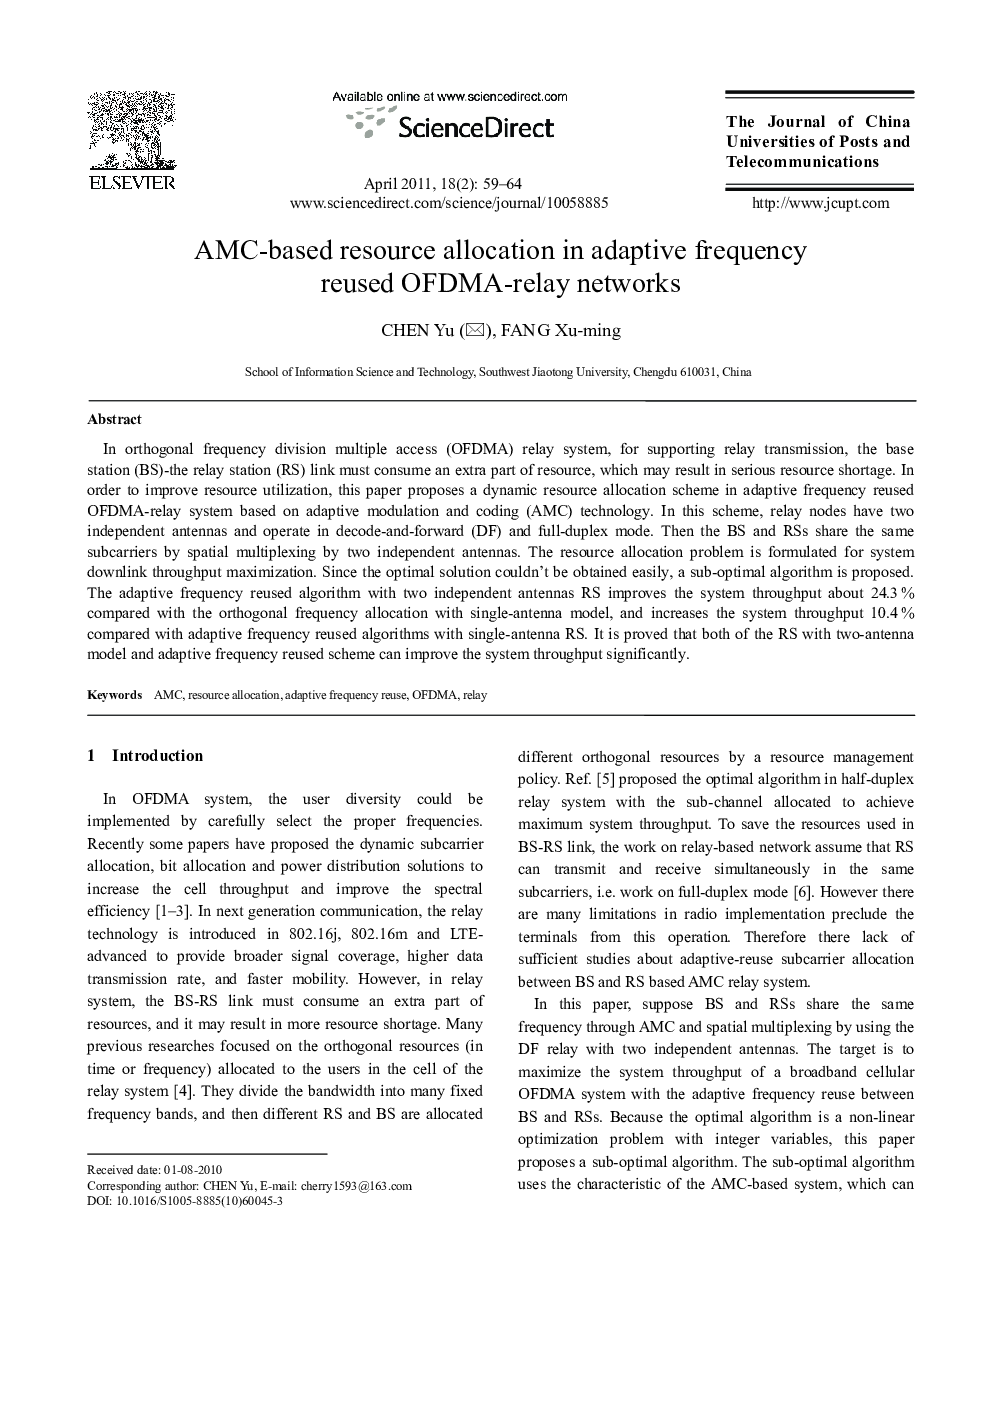 AMC-based resource allocation in adaptive frequency reused OFDMA-relay networks